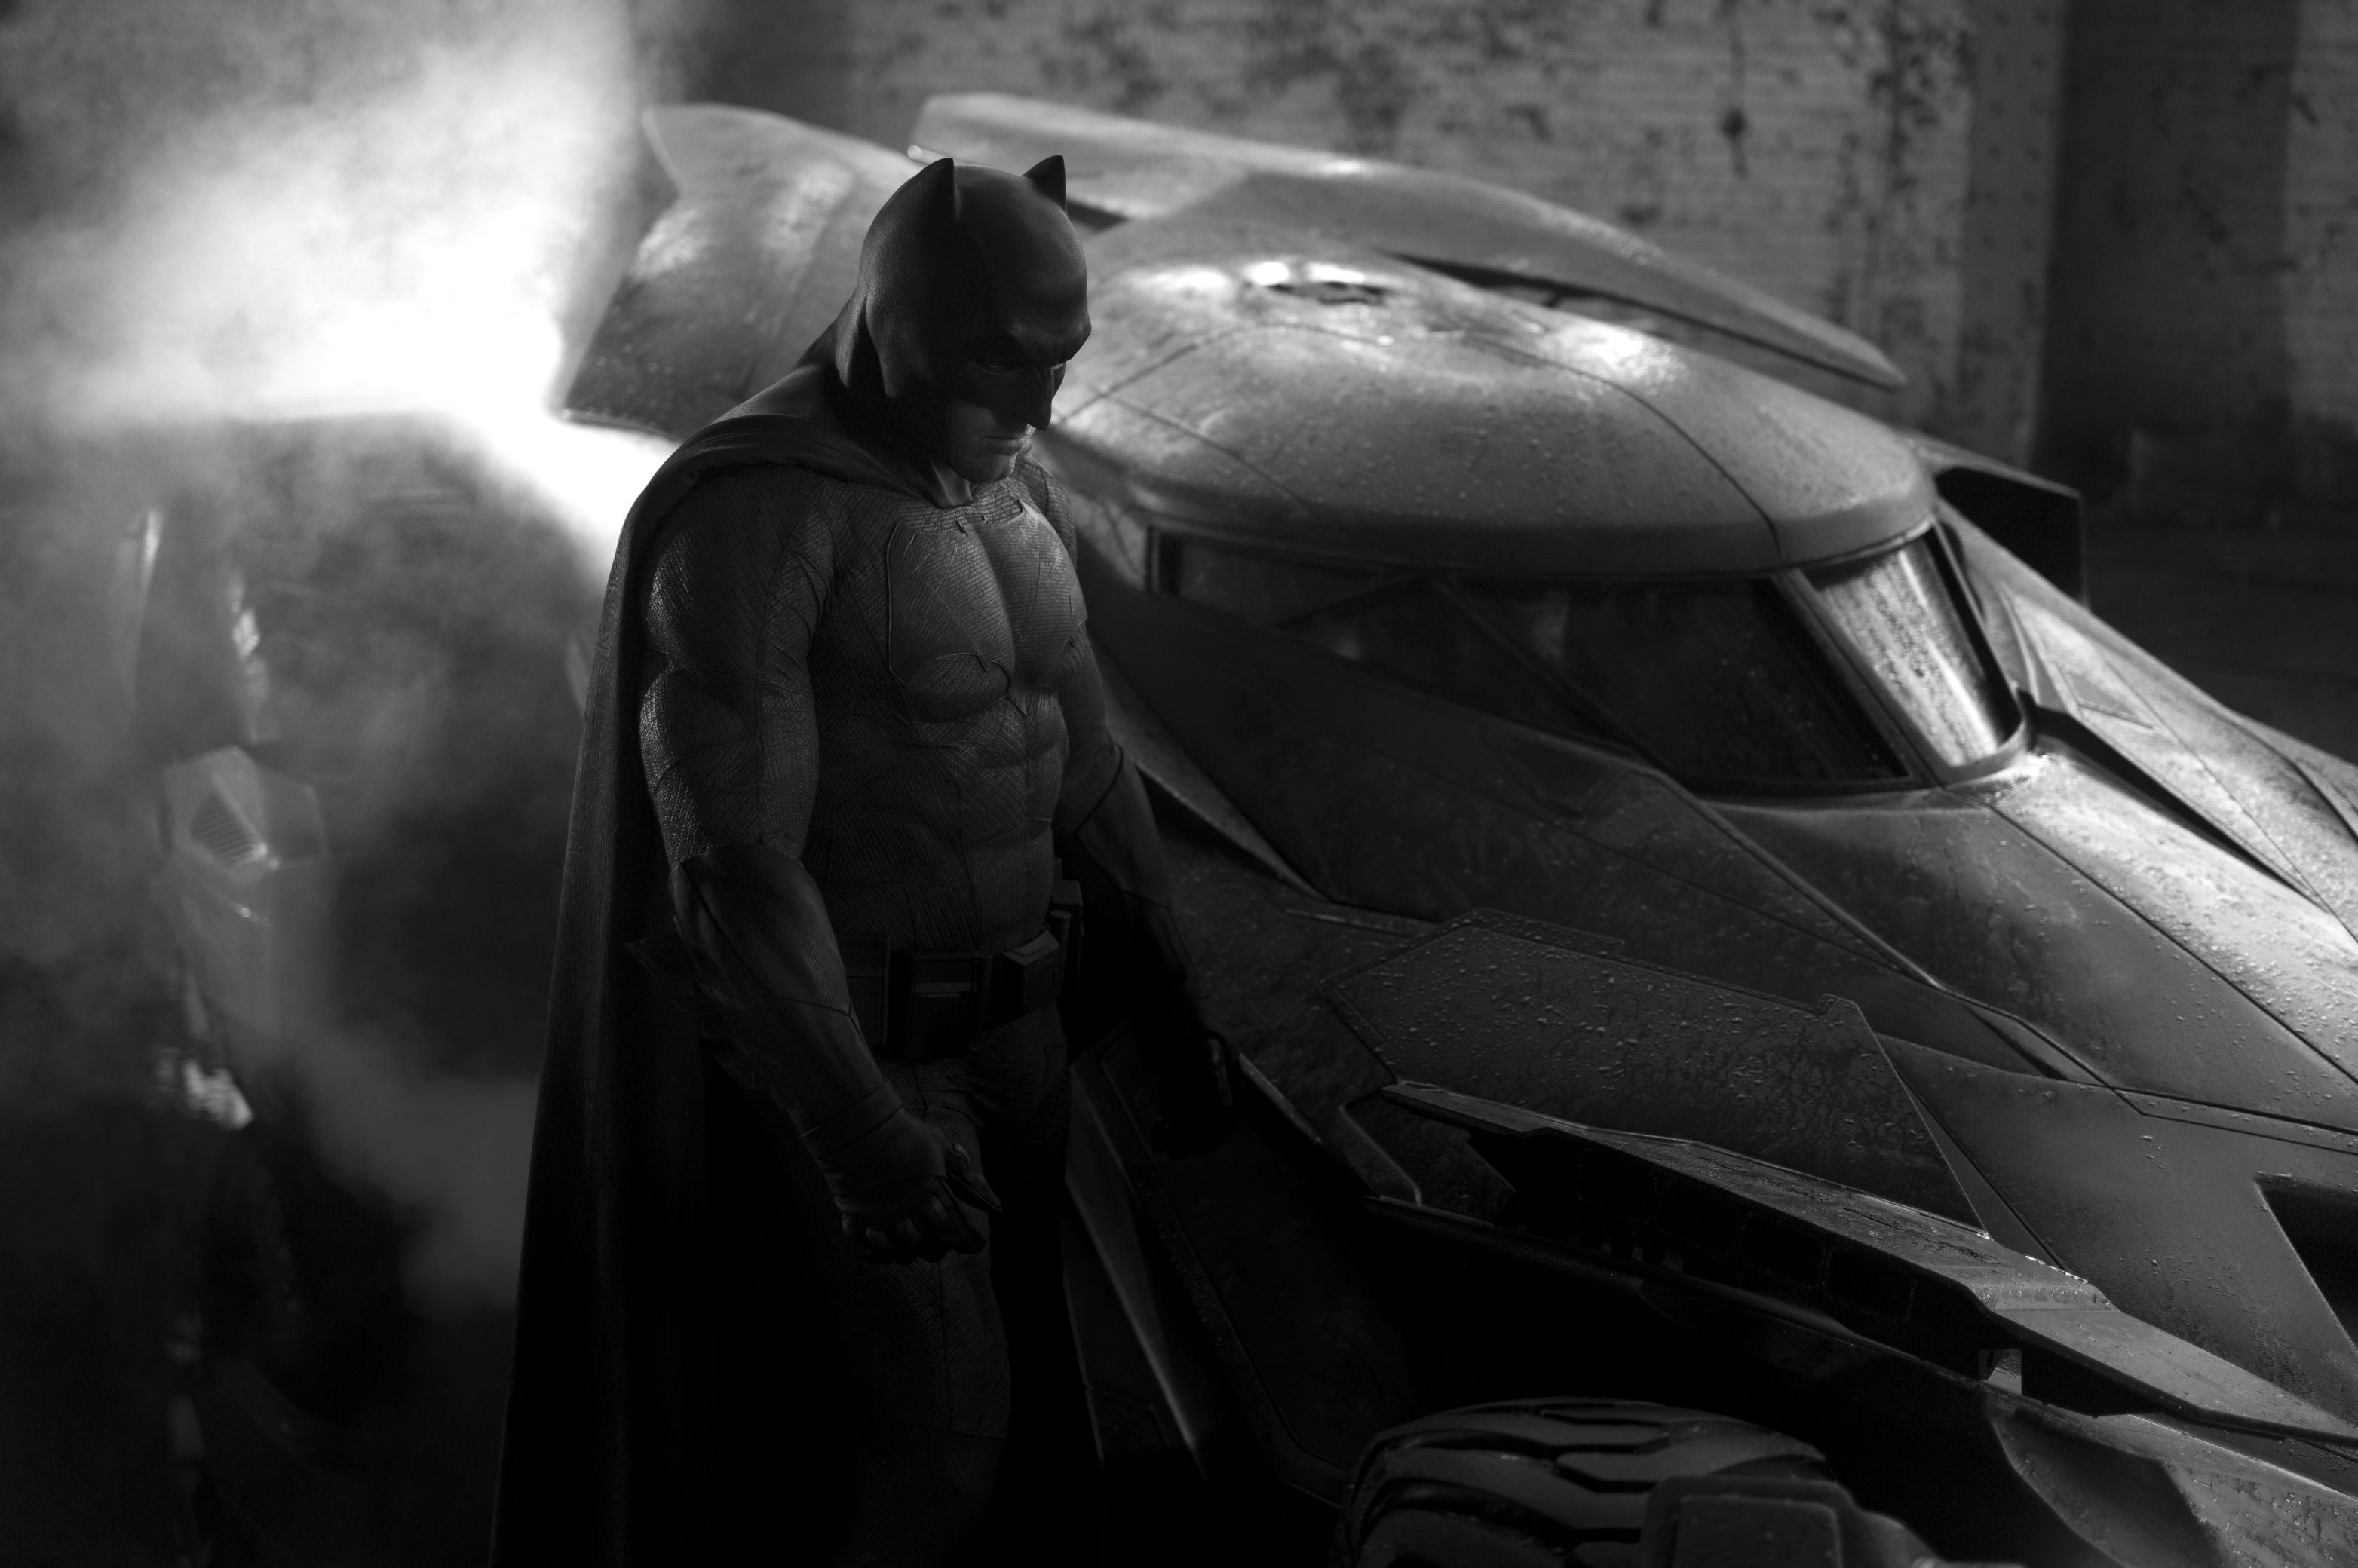 Batman Vs Superman's Batsuit And Batmobile Have Been Revealed, And ...